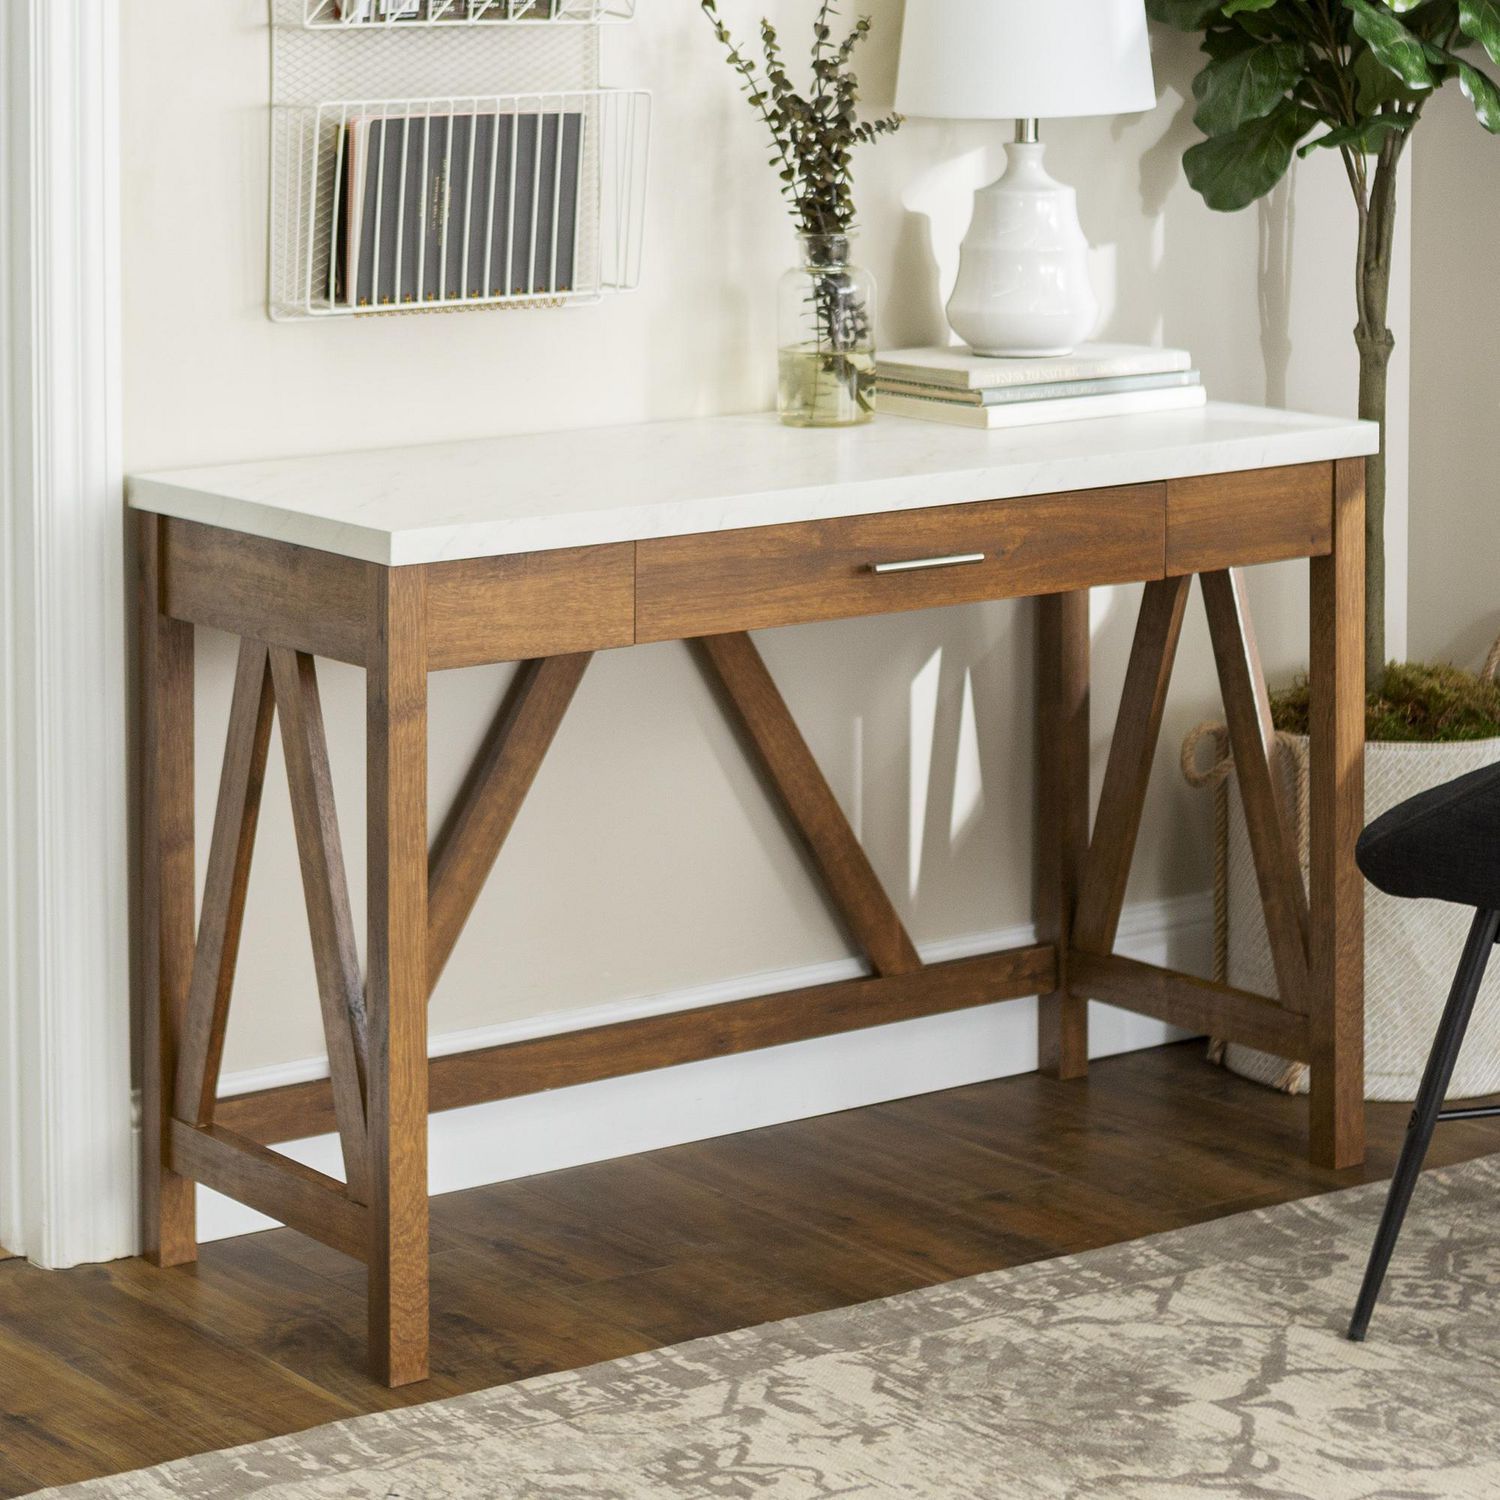 Manor Park Rustic Farmhouse Wood Computer Desk – Multiple Finishes With Regard To White Oak Wood Writing Desks (View 8 of 15)